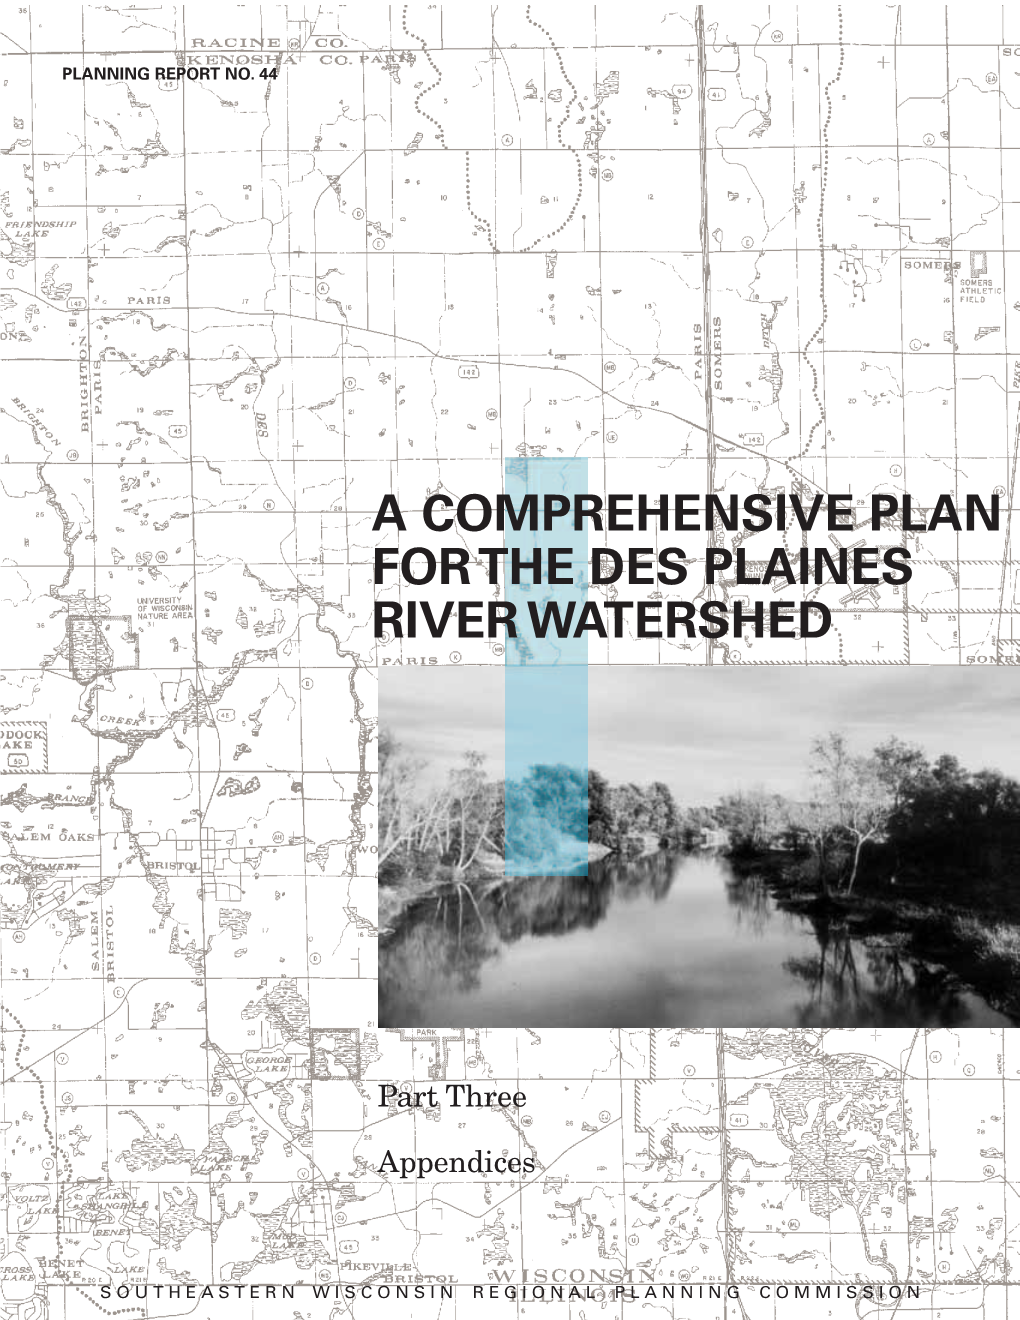 A Comprehensive Plan for the Des Plaines River Watershed